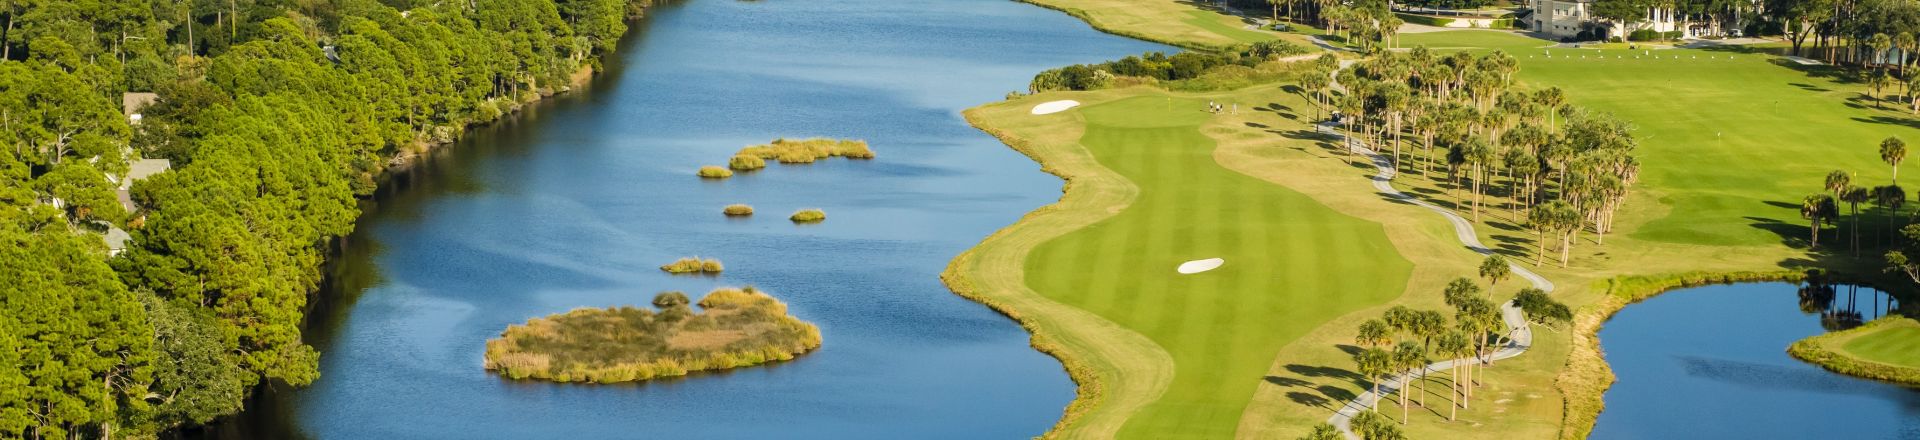 Escape to the natural beauty of Osprey Point Golf Course at Kiawah Island Golf Resort. This captivating image showcases the stunning fairways and lush landscapes of one of South Carolina's premier golf destinations.